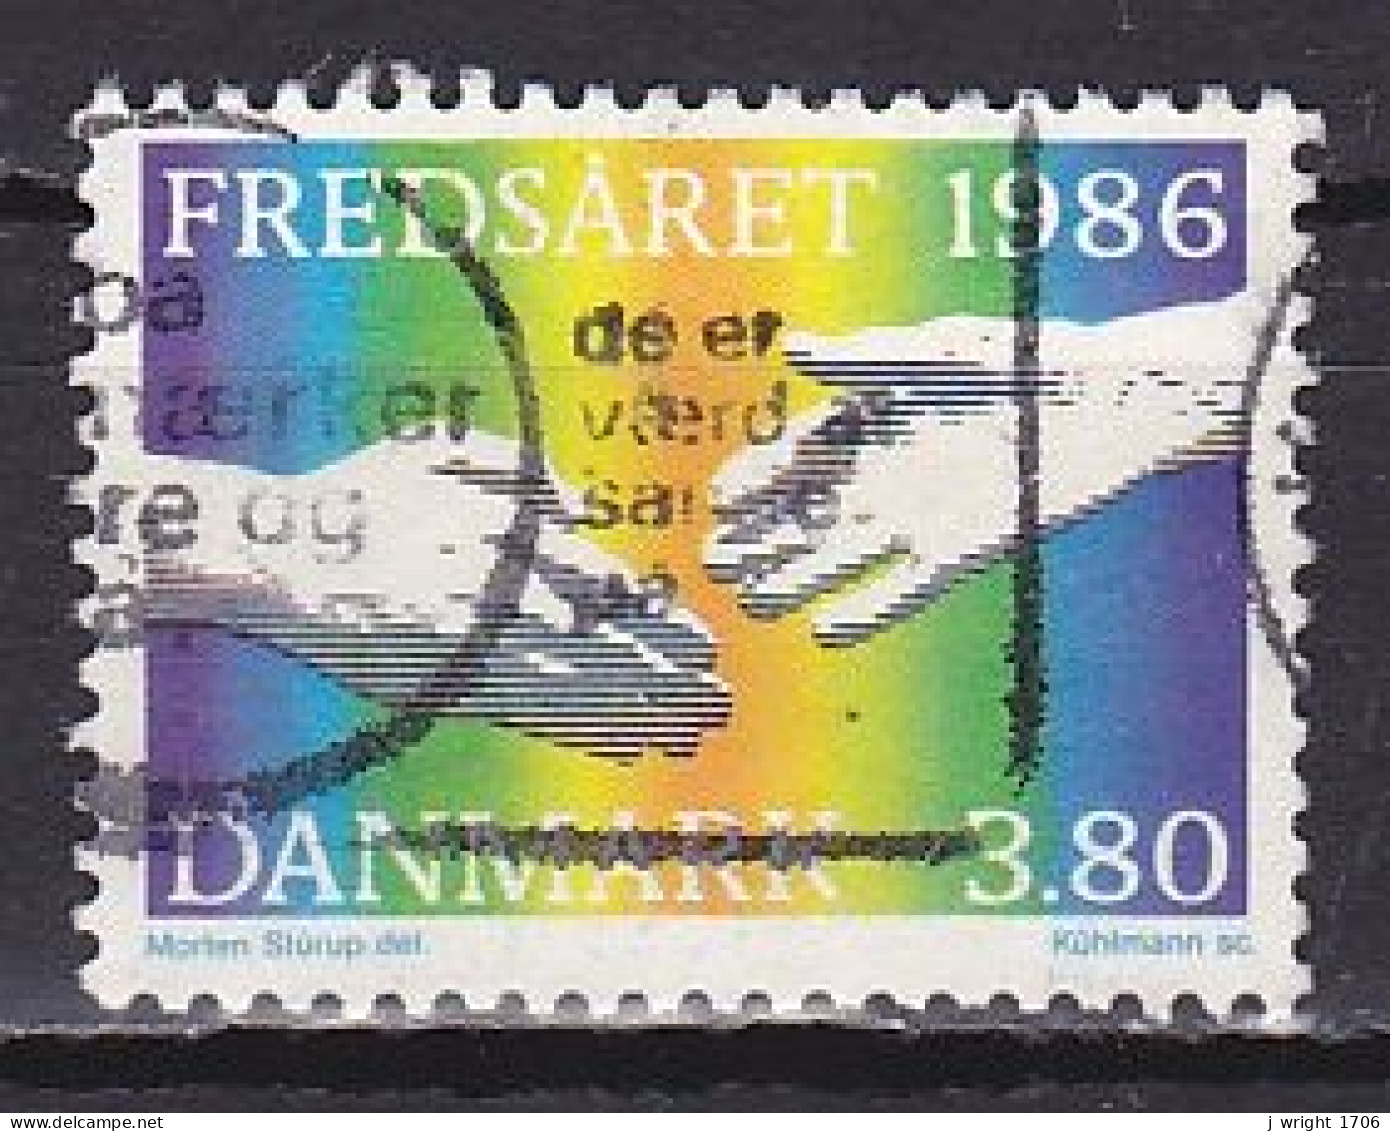 Denmark, 1986, International Peace Year, 3.80kr, USED - Used Stamps